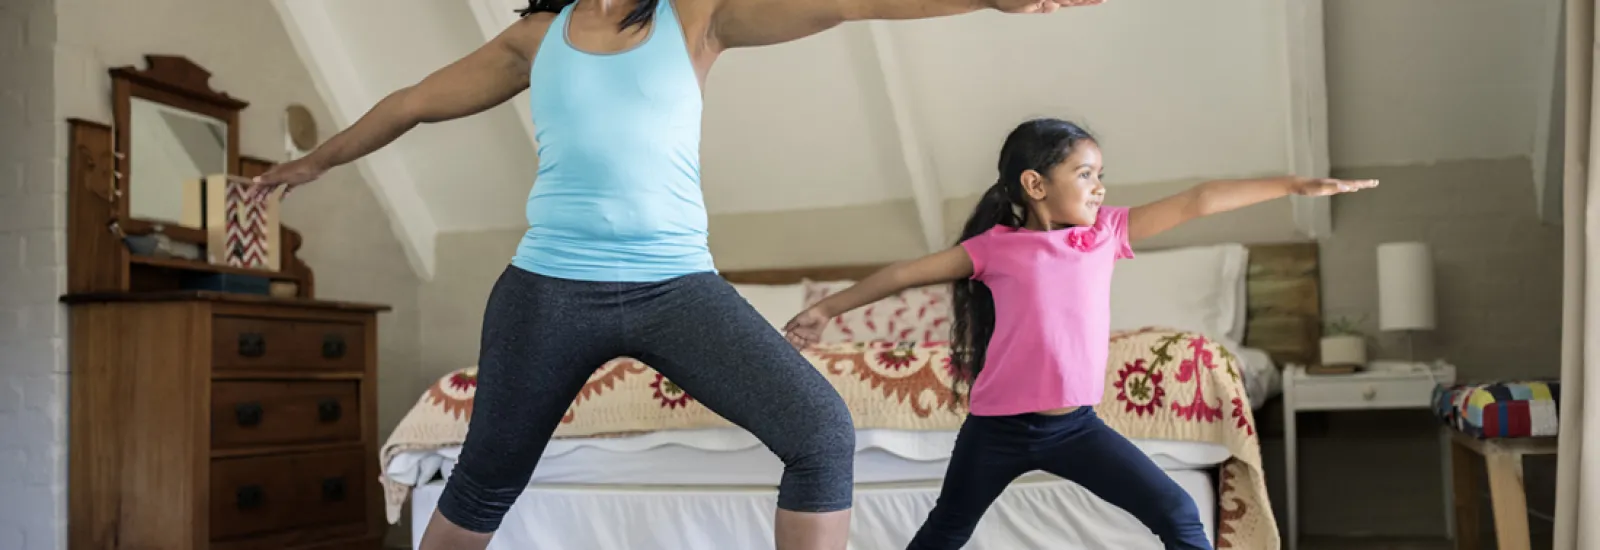 Blog, 5 ways to improve home workouts